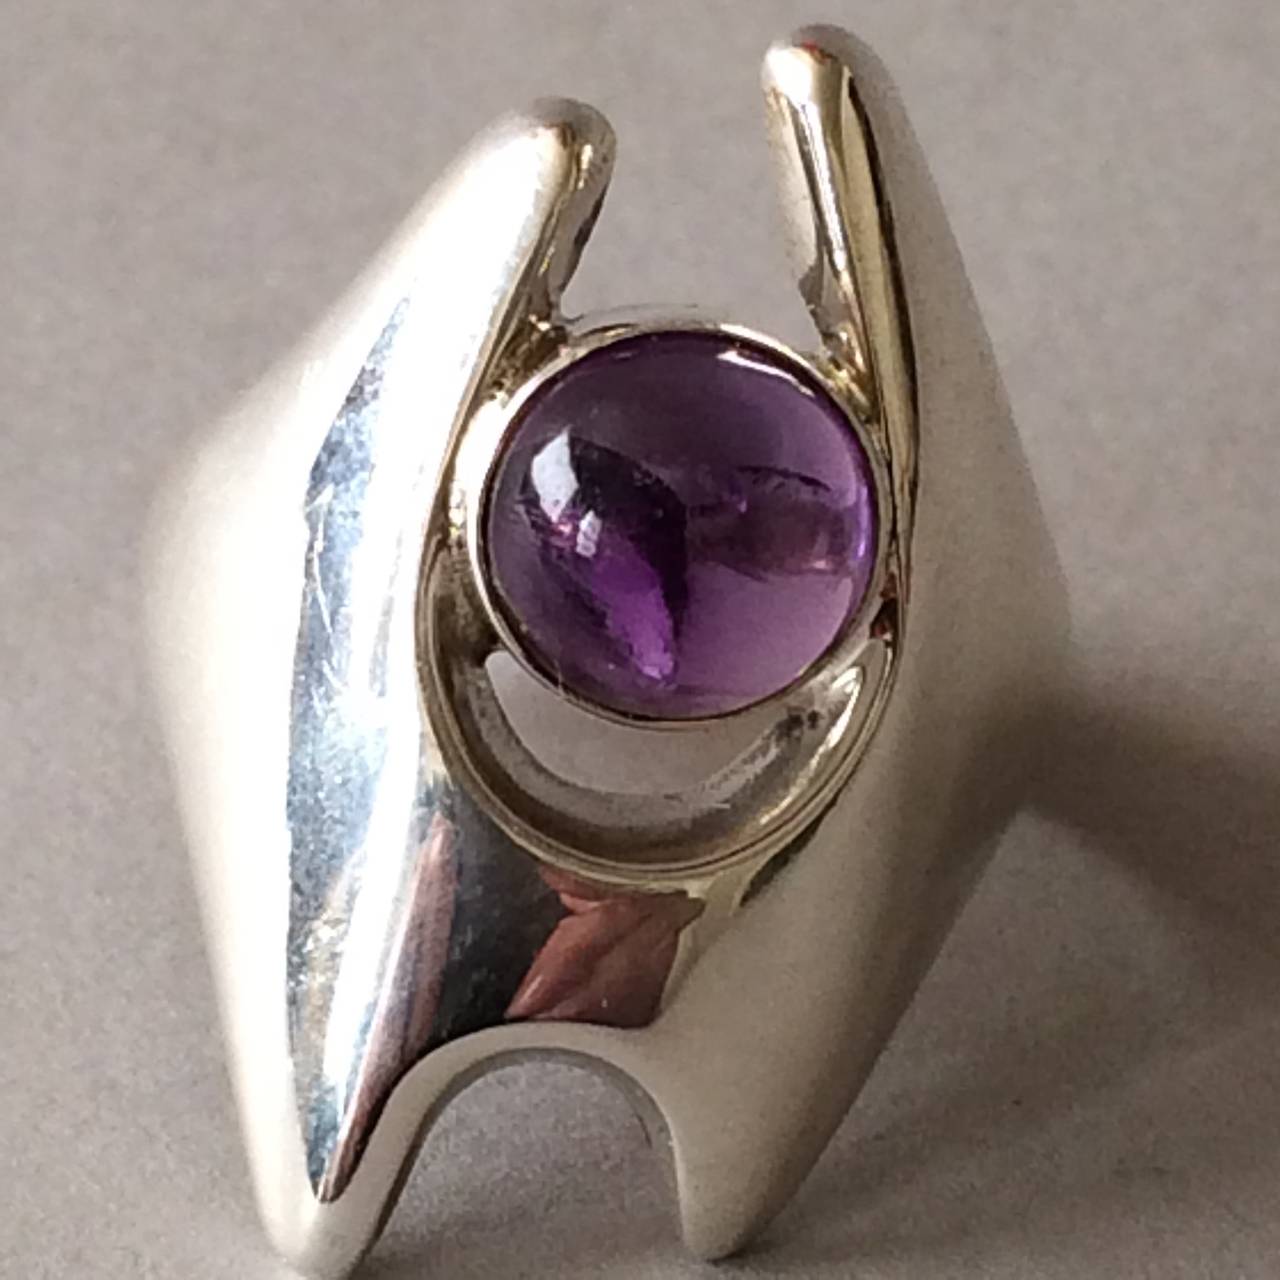 Georg Jensen Sterling Silver Modernist Ring, No. 139 by Henning Koppel with amethyst stone. 925S  

Size 7. 

Sterling Denmark

Henning Koppel (1918 - 1981) was educated as a sculptor and designer at the Royal Danish Academy of Fine Arts in